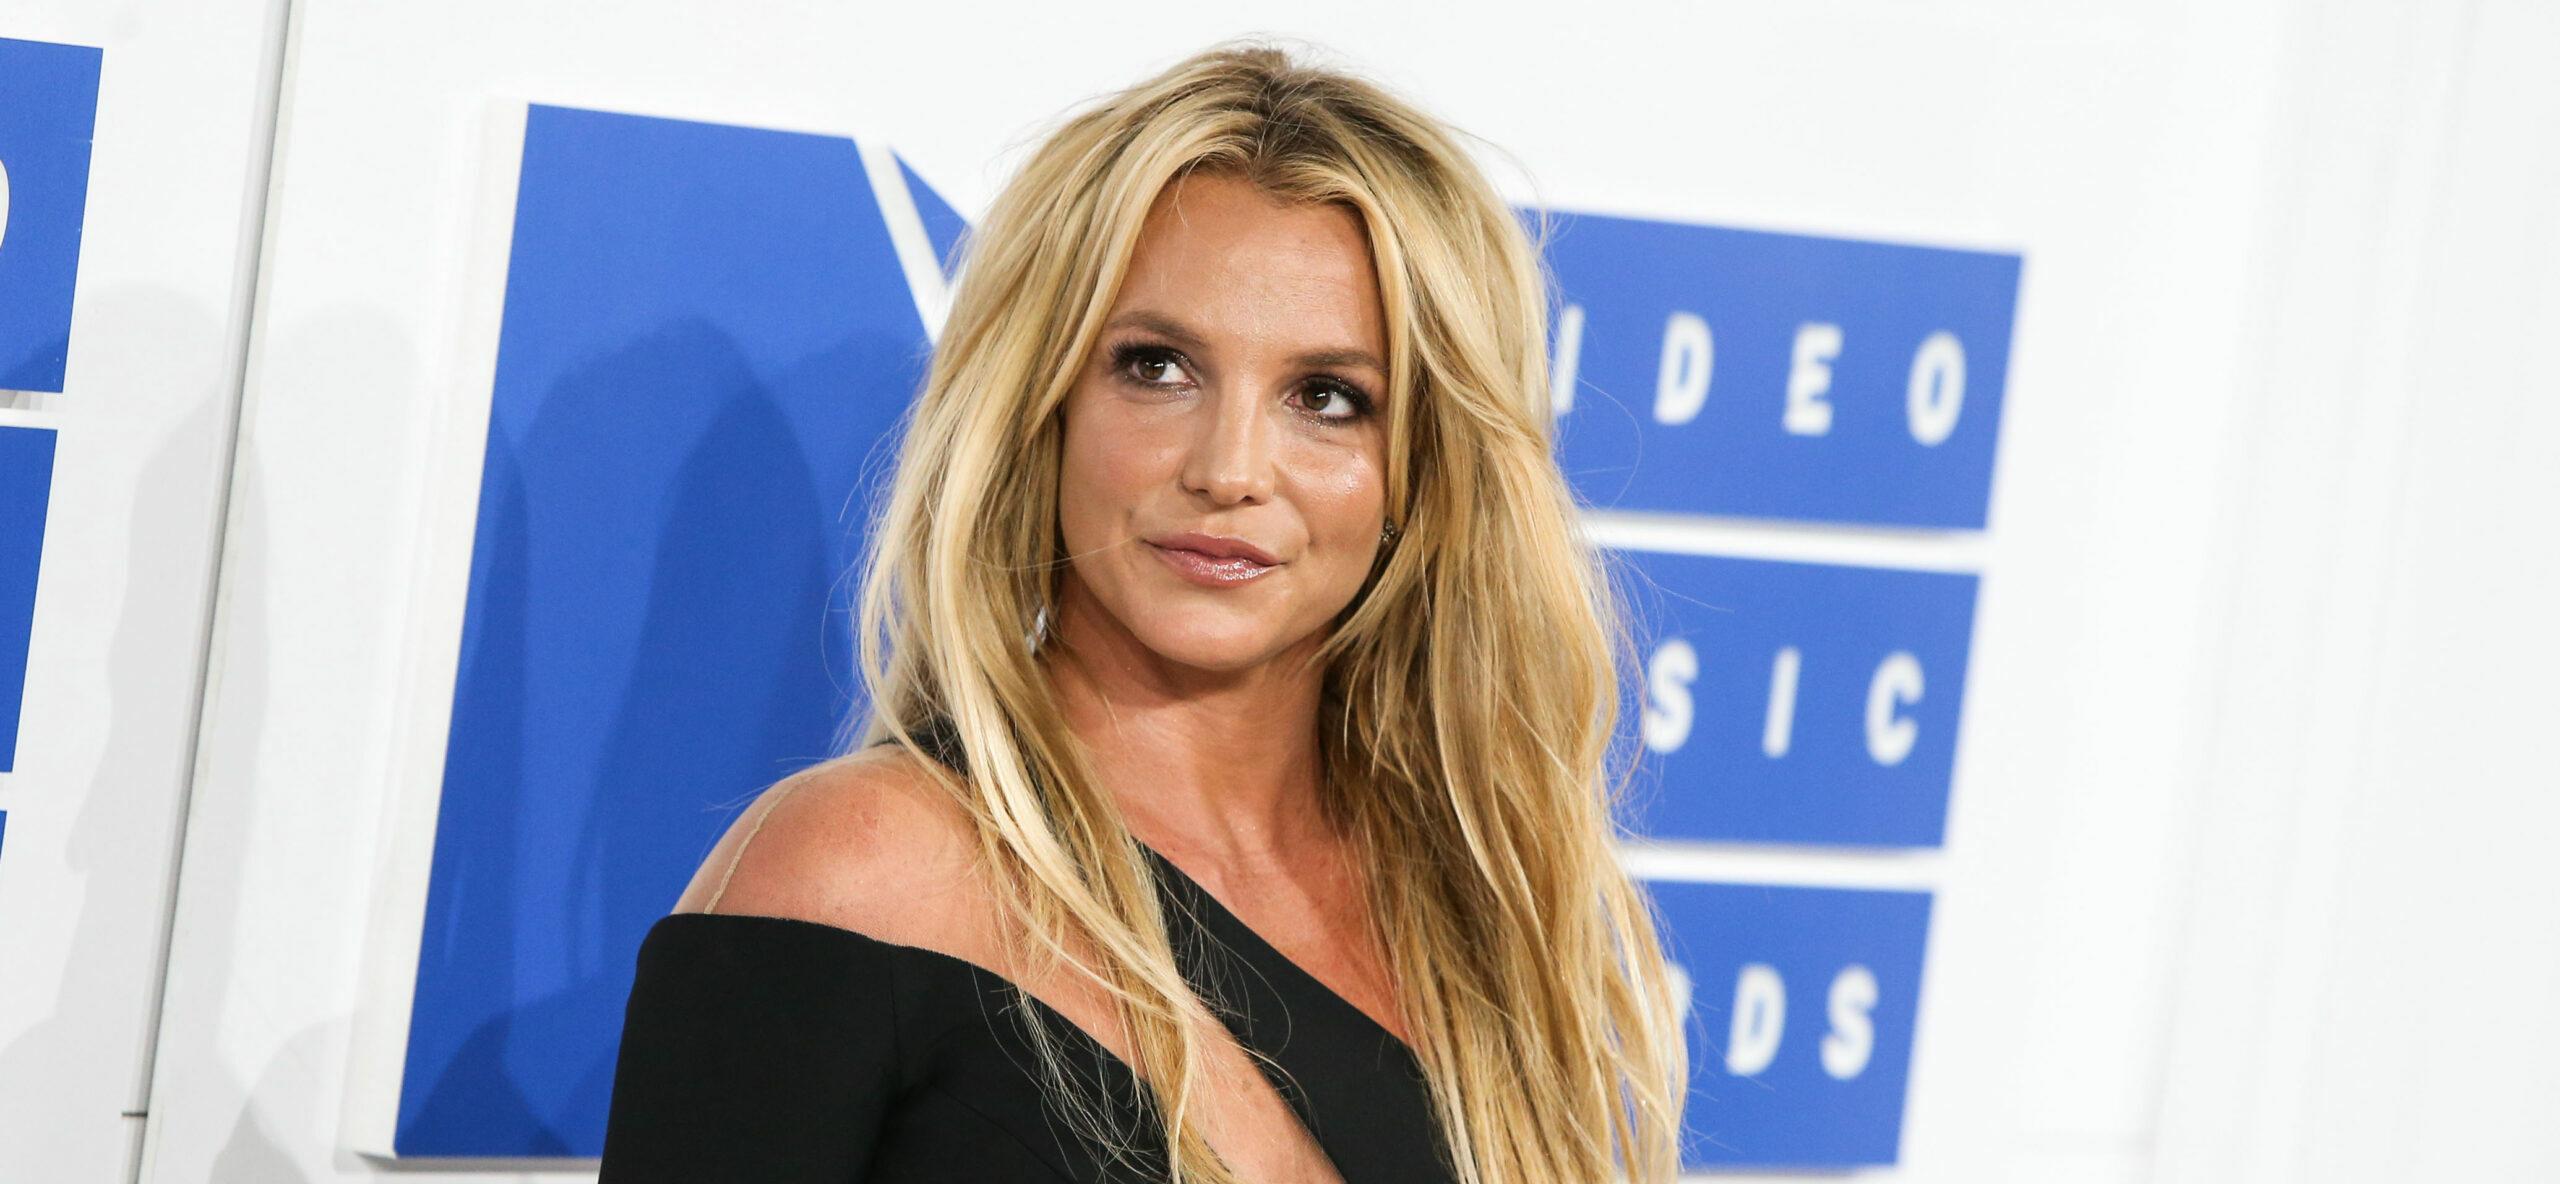 Britney Spears Is ‘Embarrassed’ After Videos Of Her Dancing Surface Online